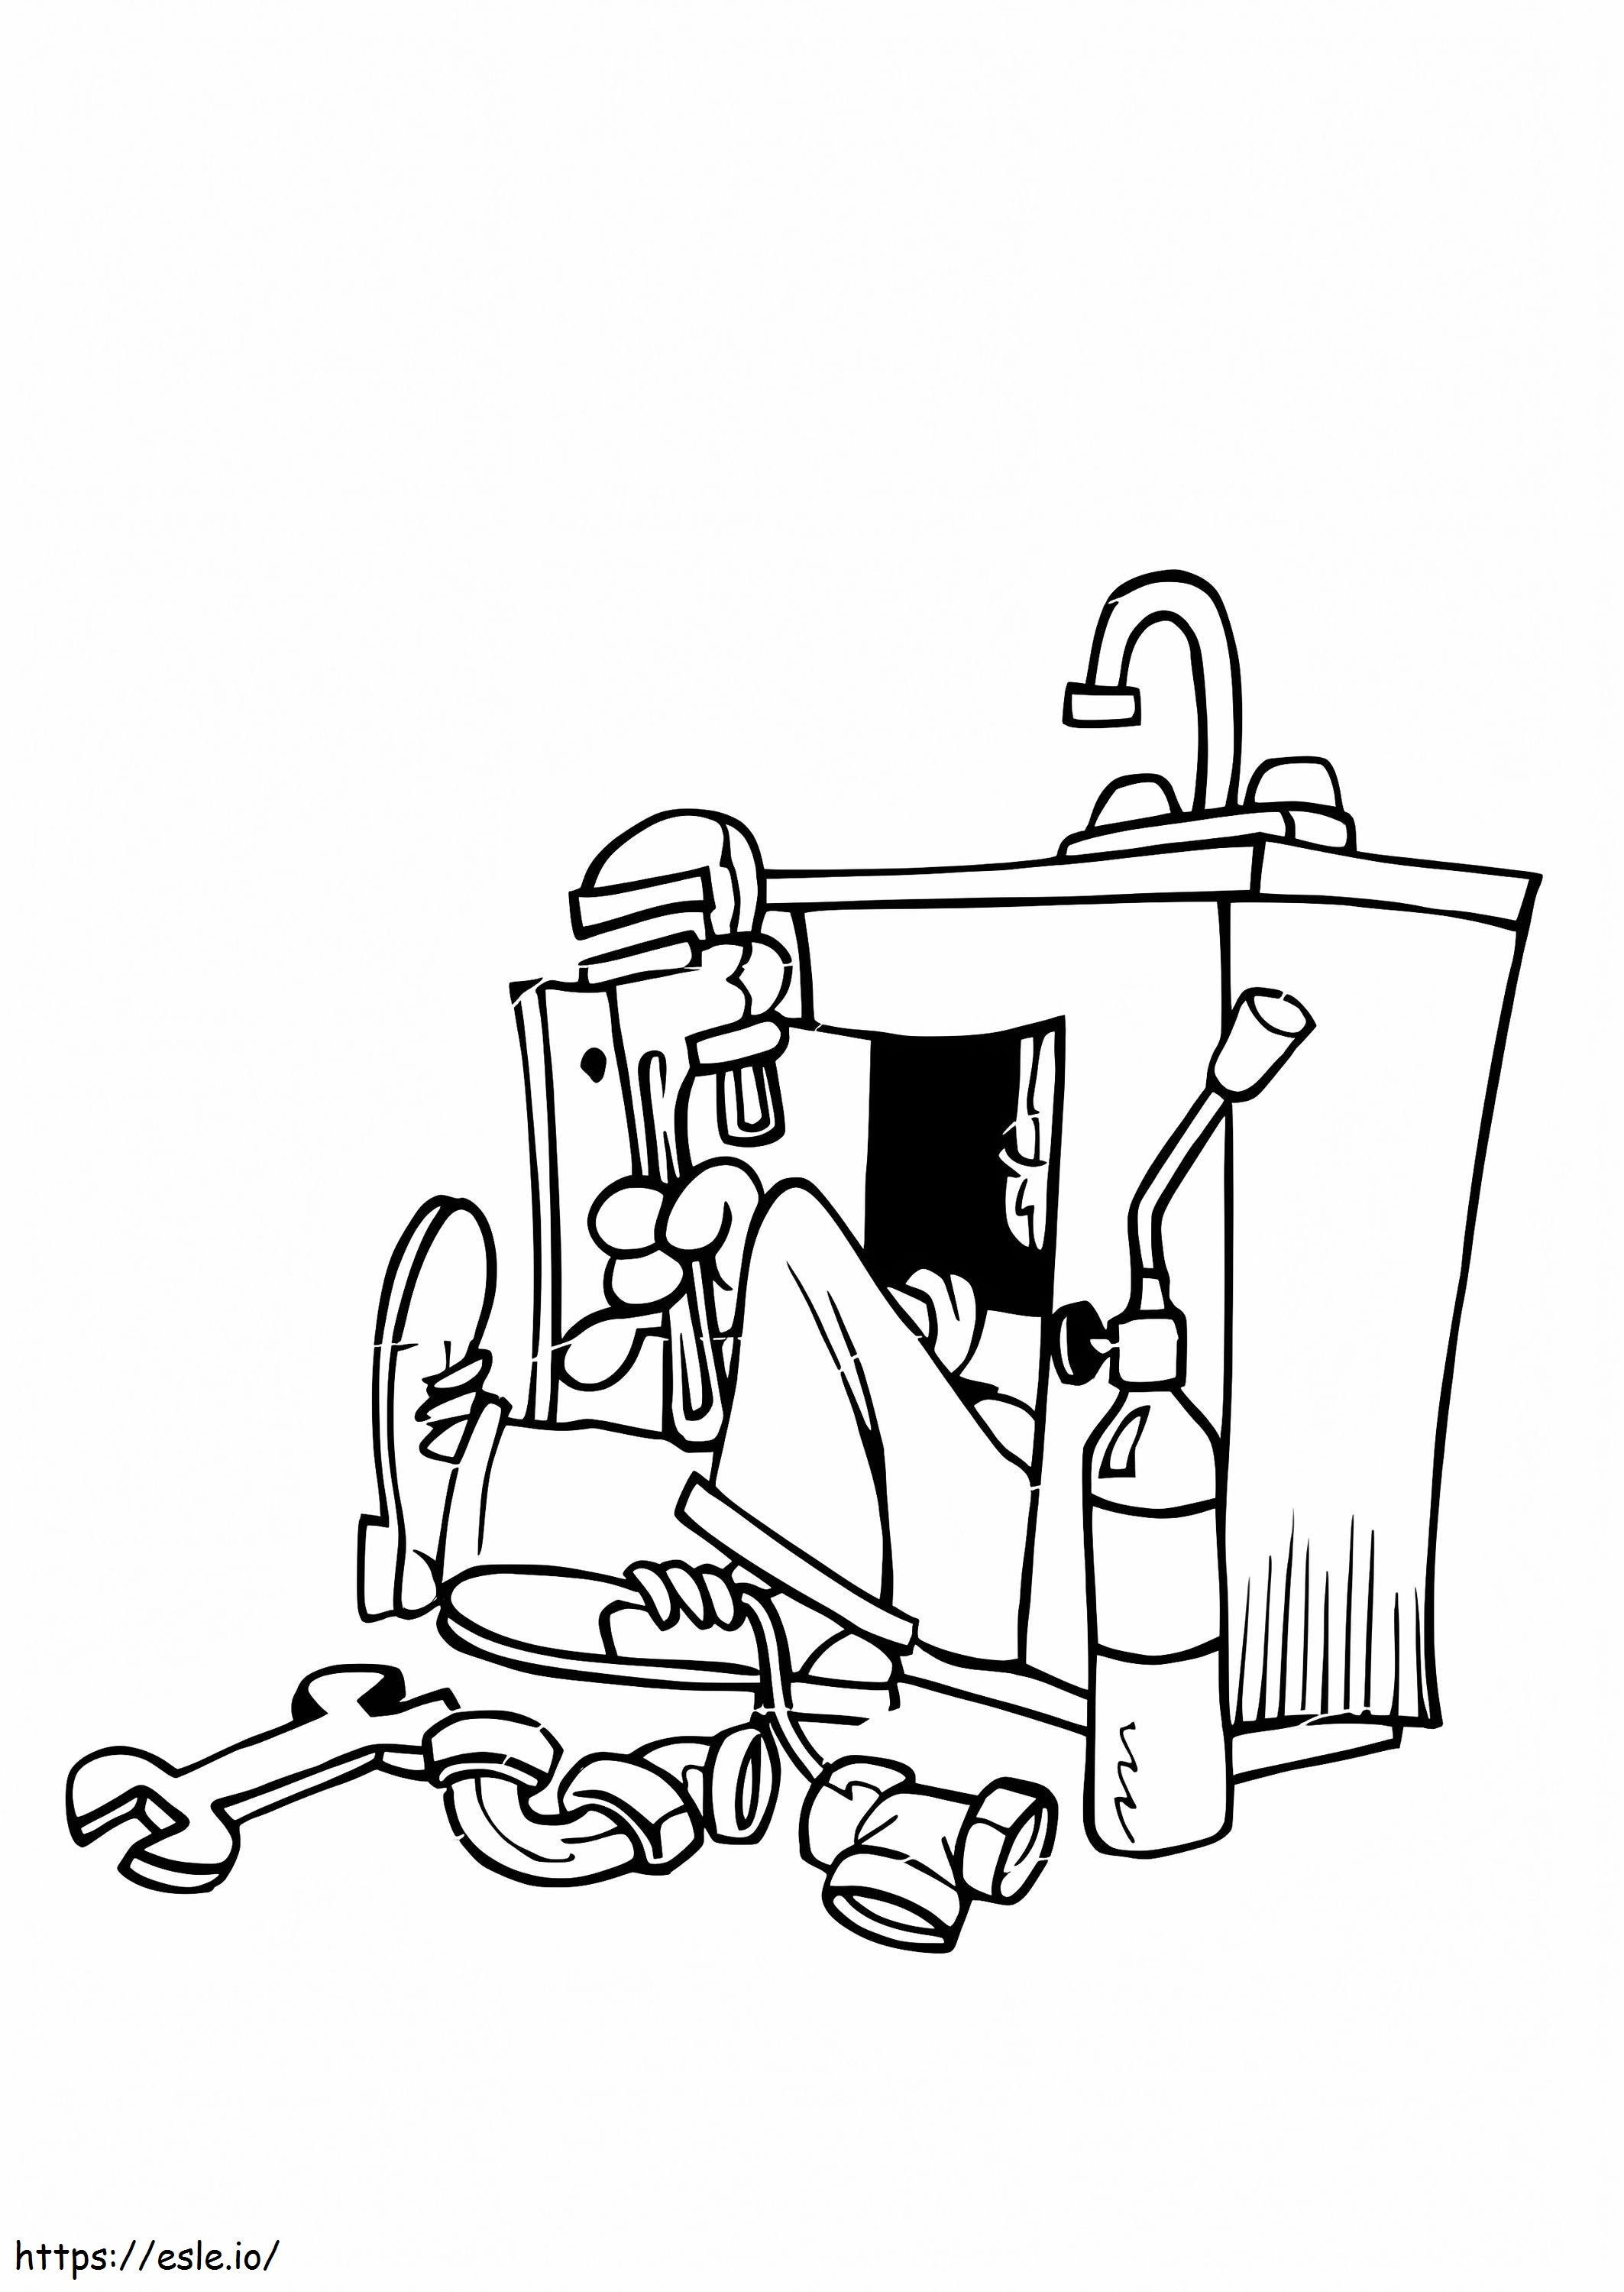 Plumber 7 coloring page